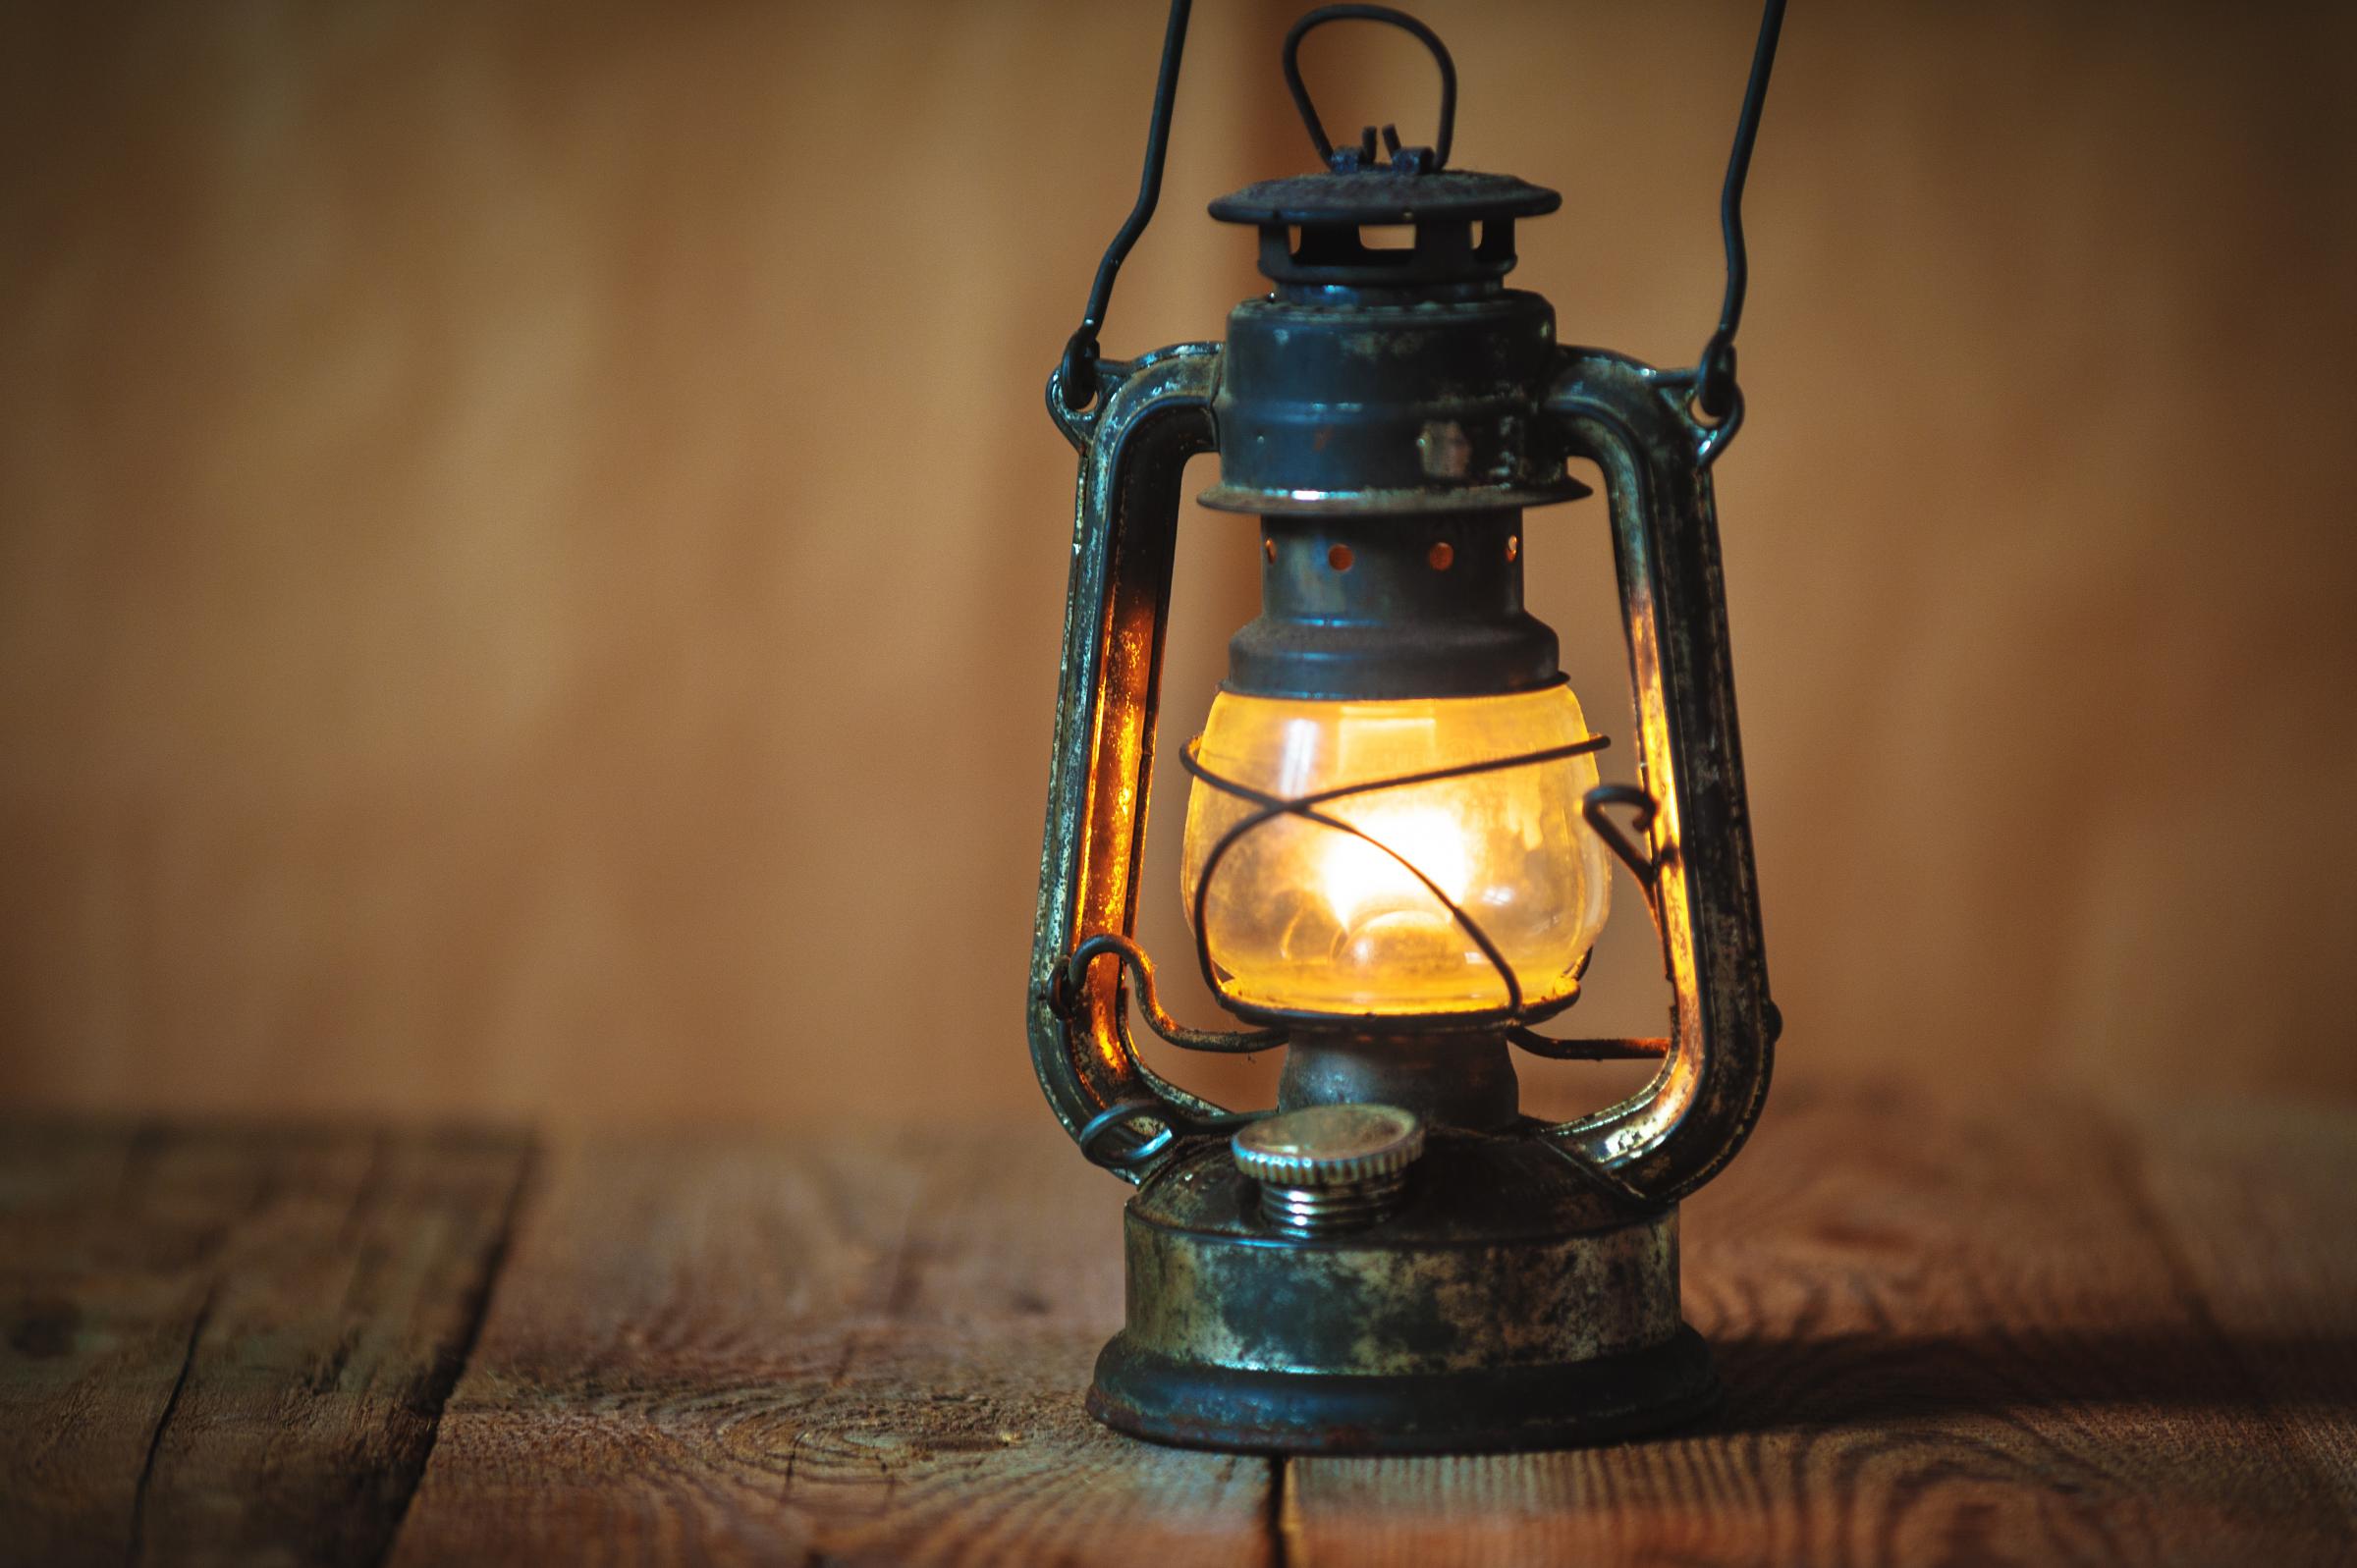 vintage kerosene oil lantern lamp burning with a soft glow light in an antique rustic country barn with aged wood floor